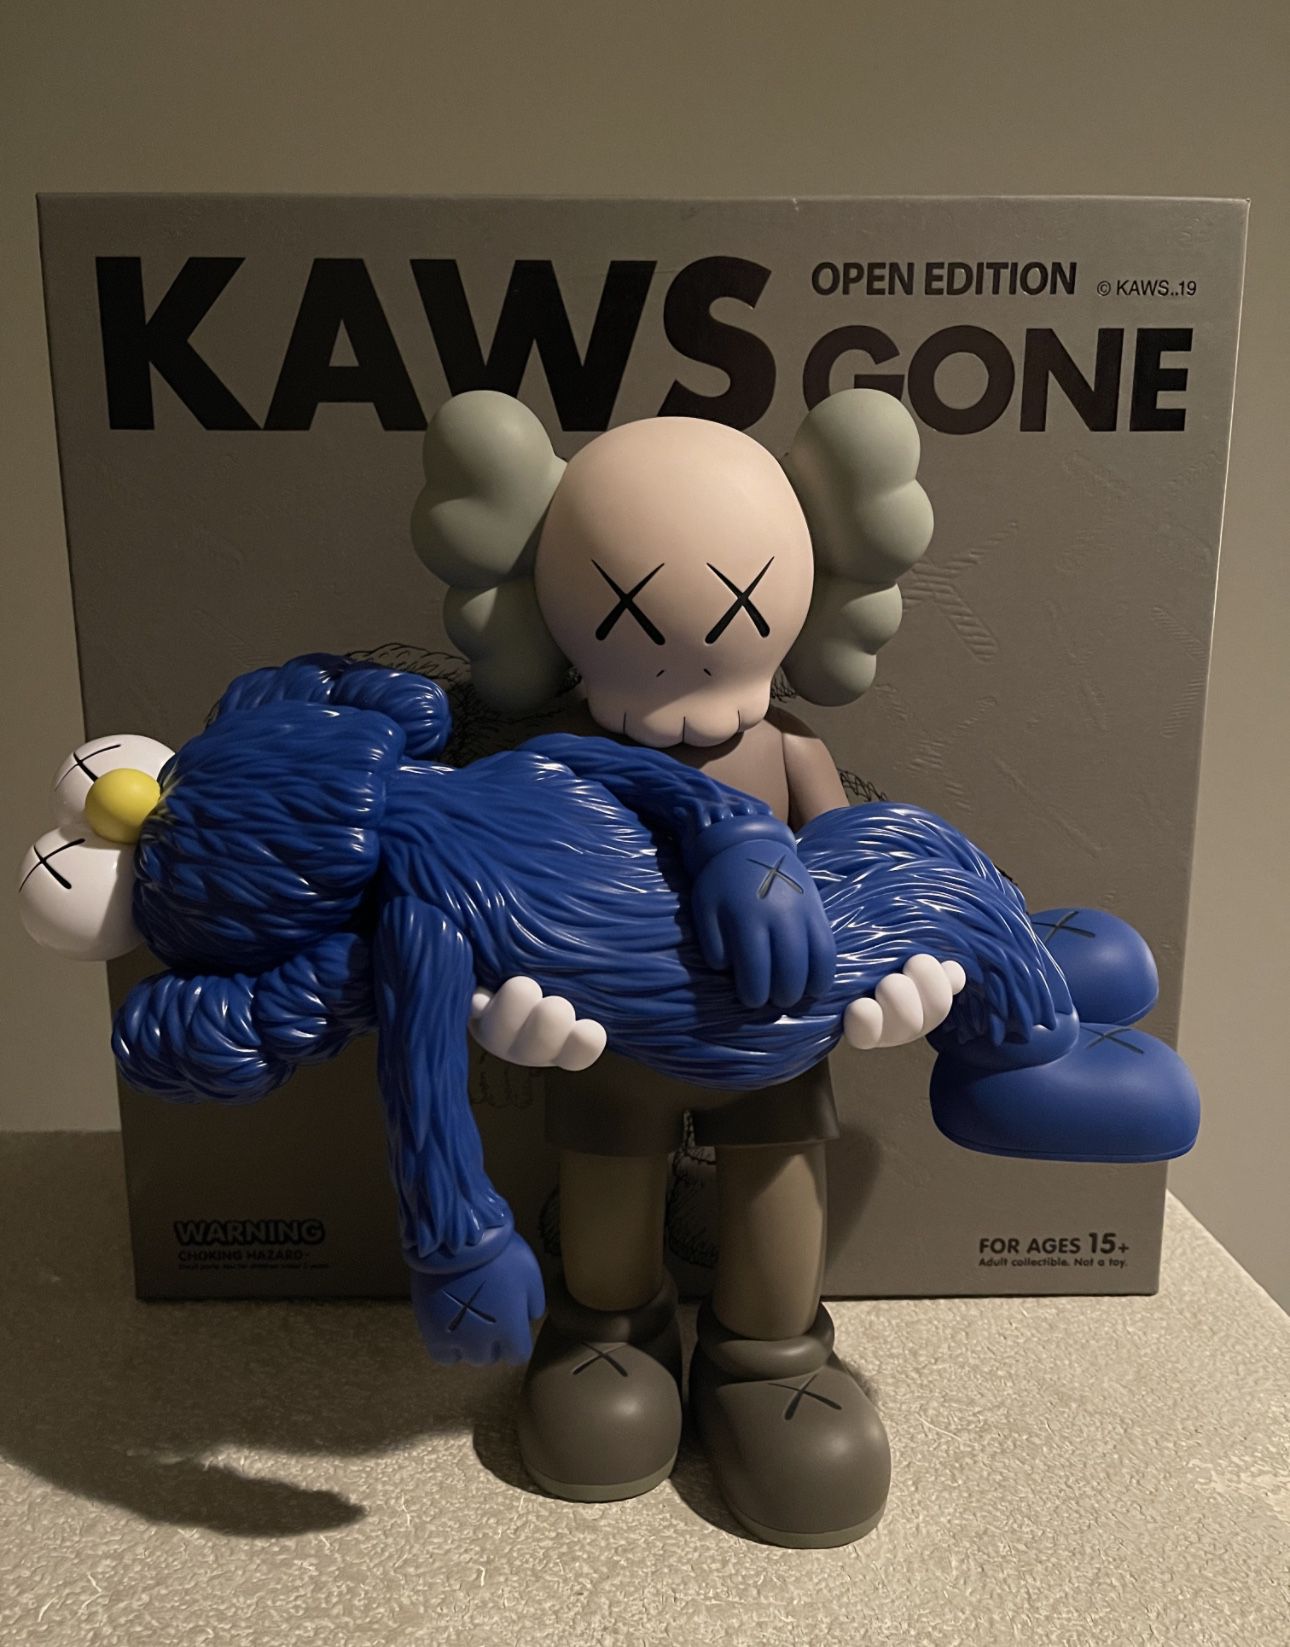 Kaws - Gone (Brown) Vinyl Figure AUTHENTIC for Sale in Roseville